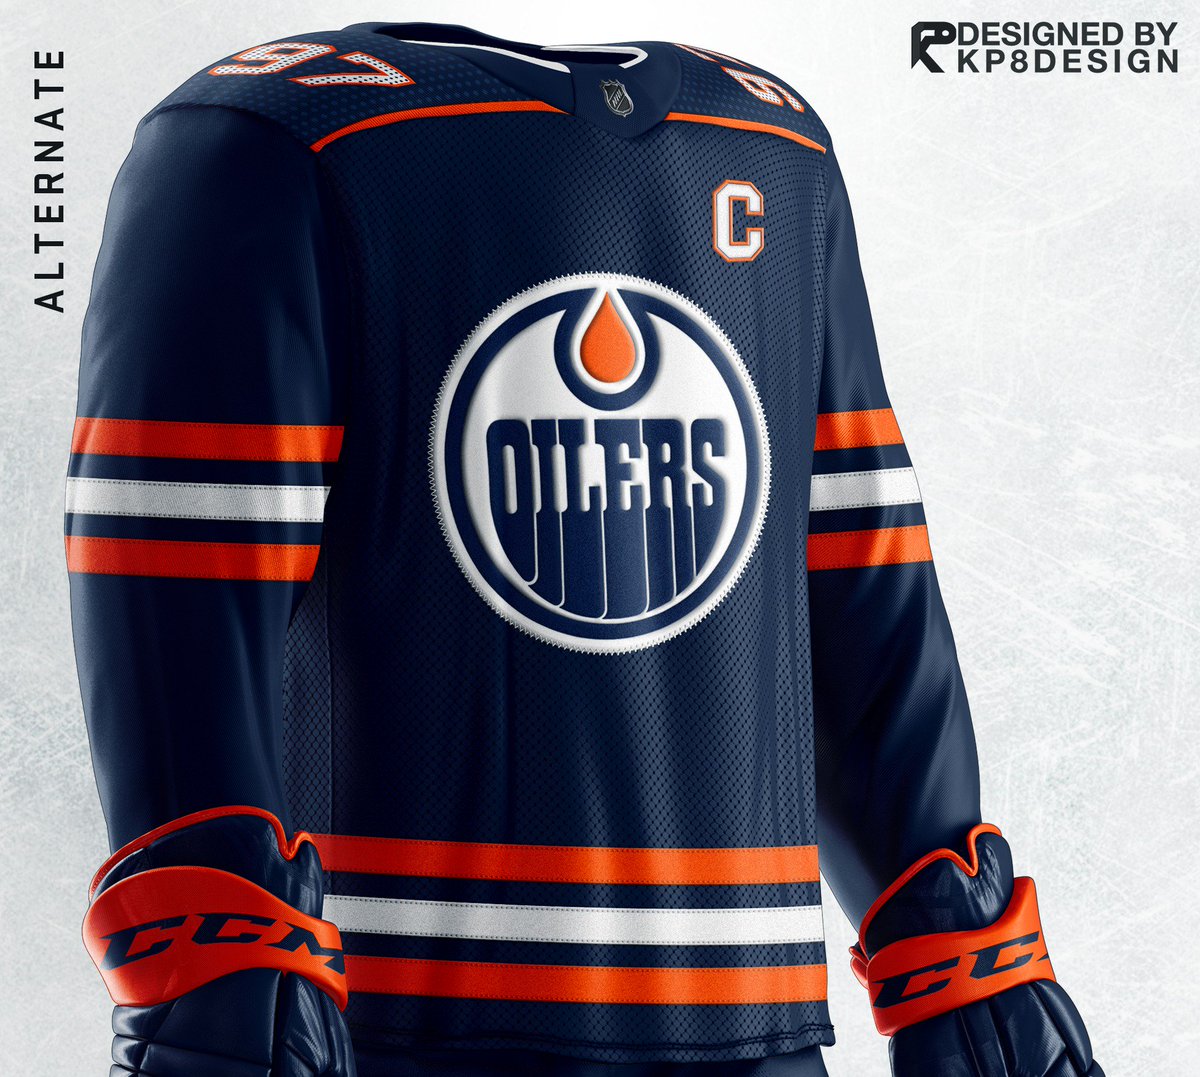 oilers concept jersey